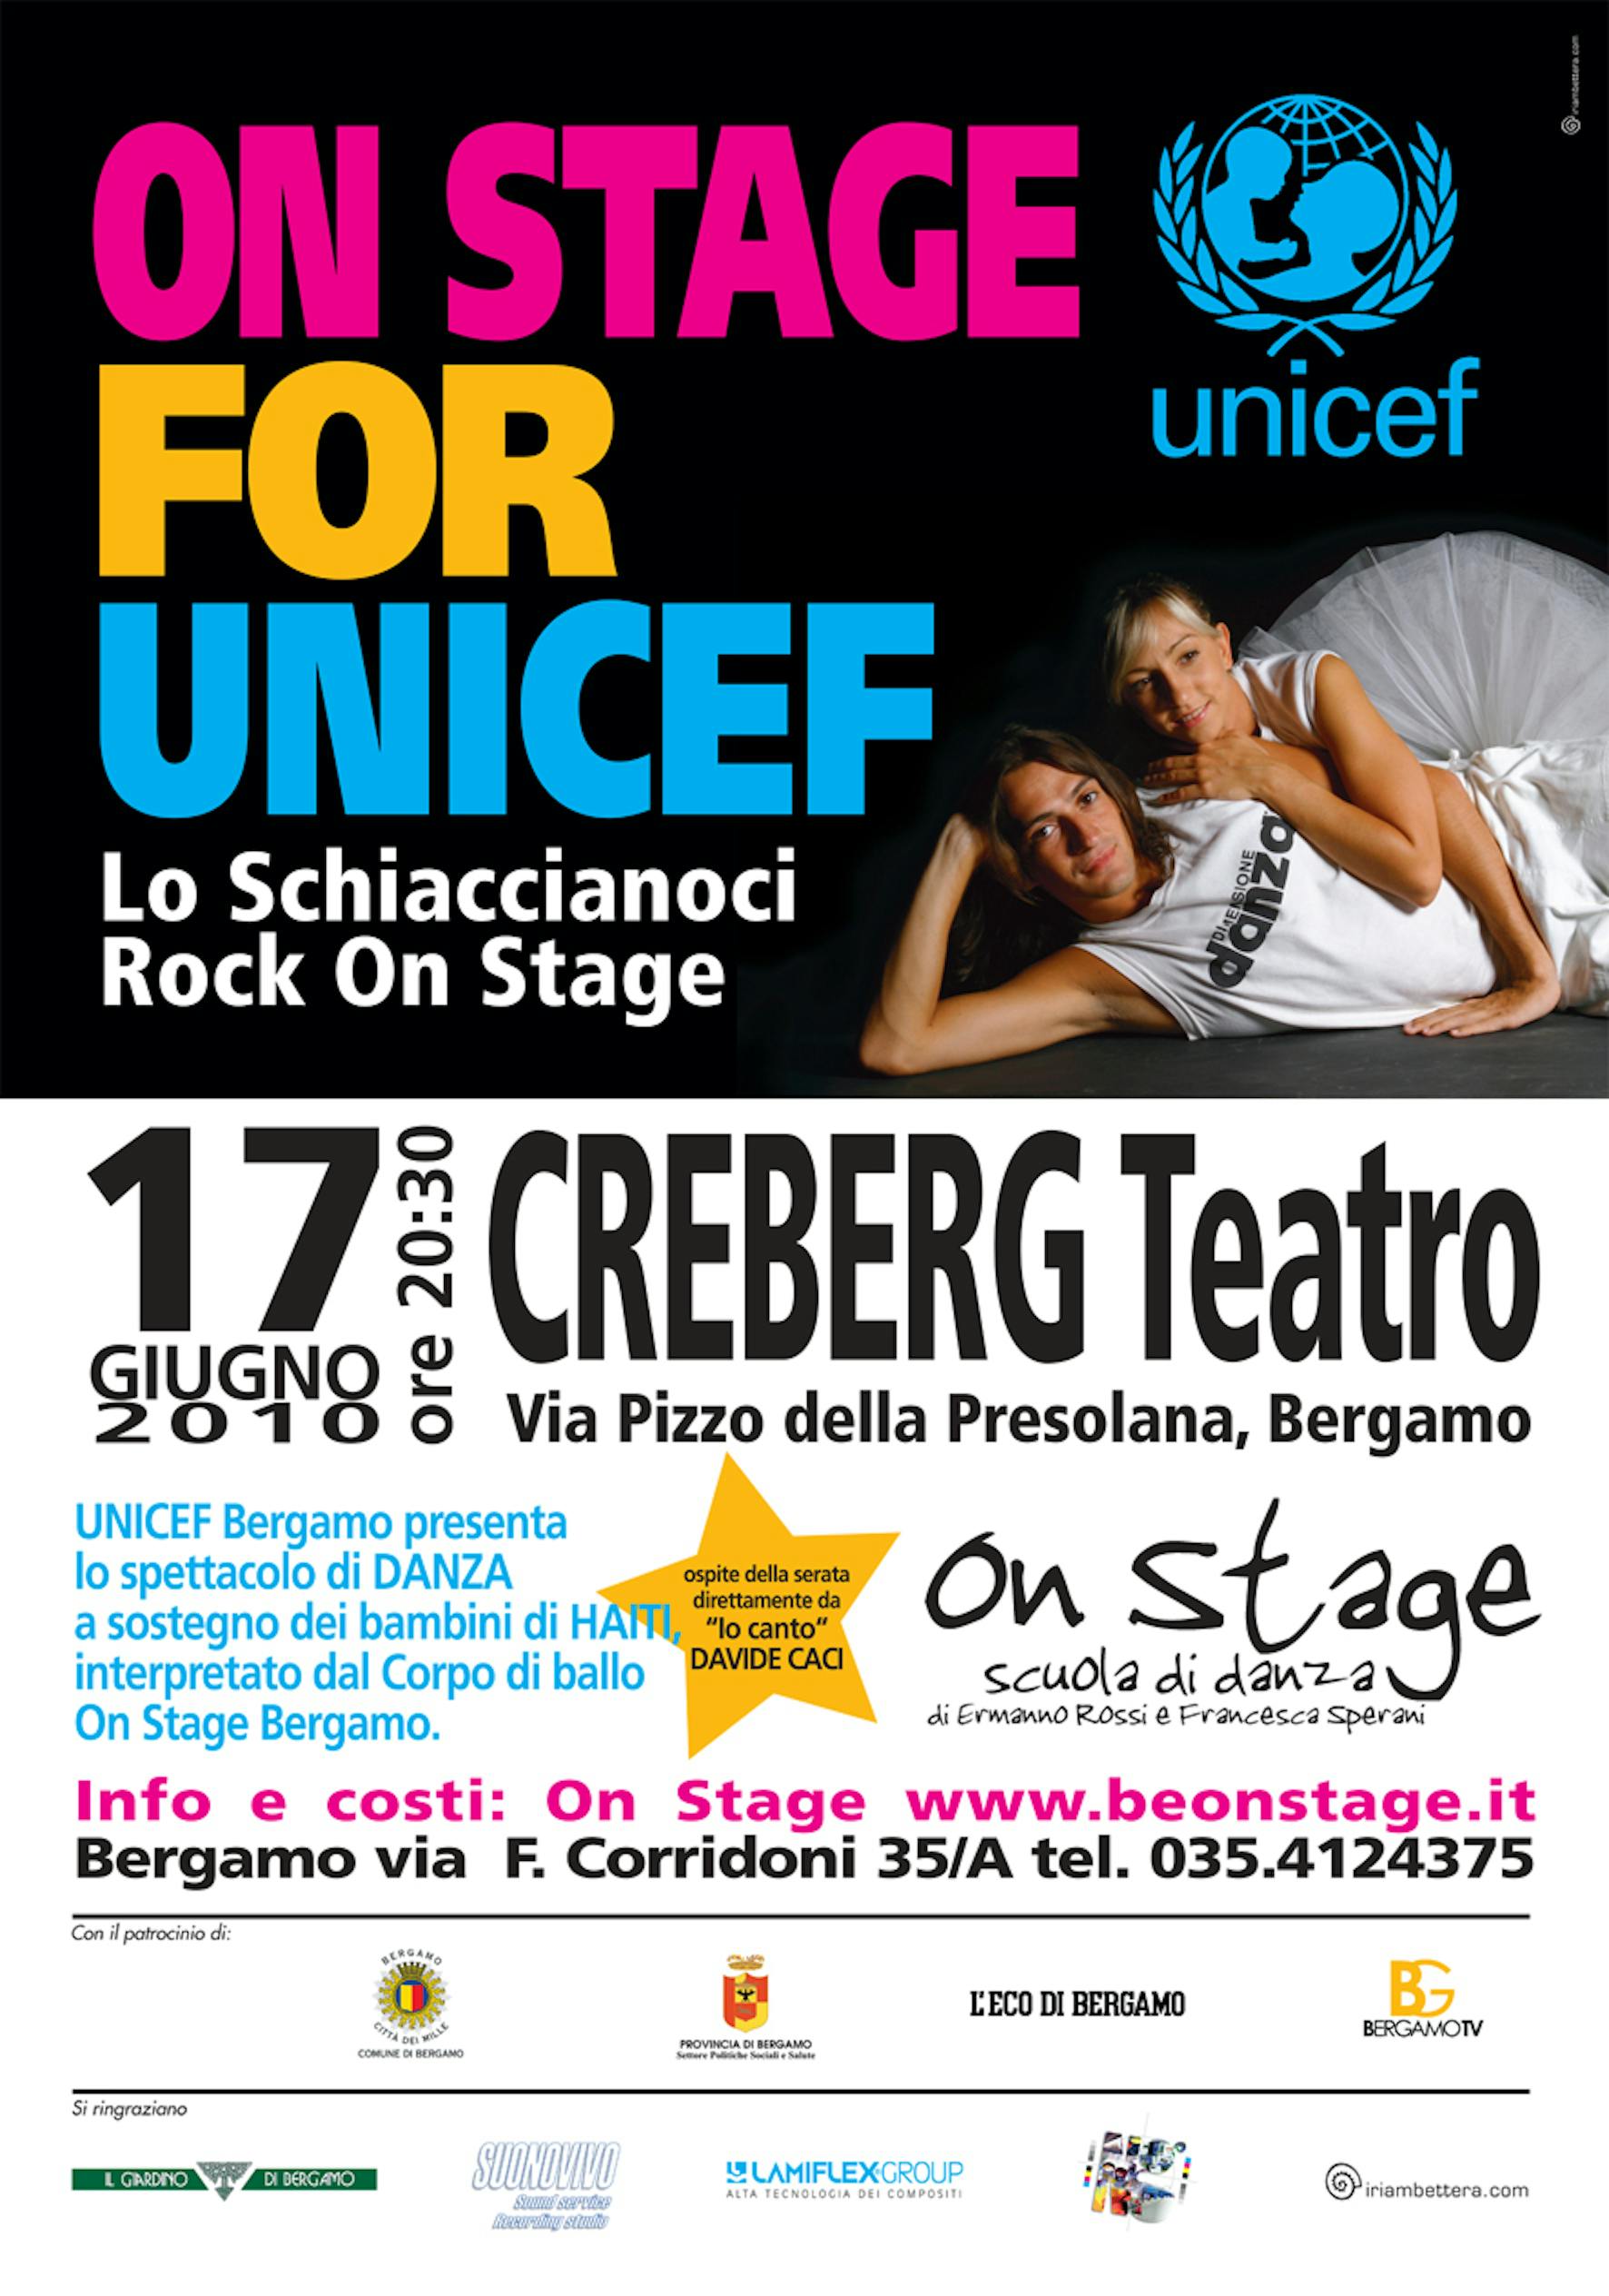  “On stage for UNICEF lo Schiaccianoci, Rock On Stage” 